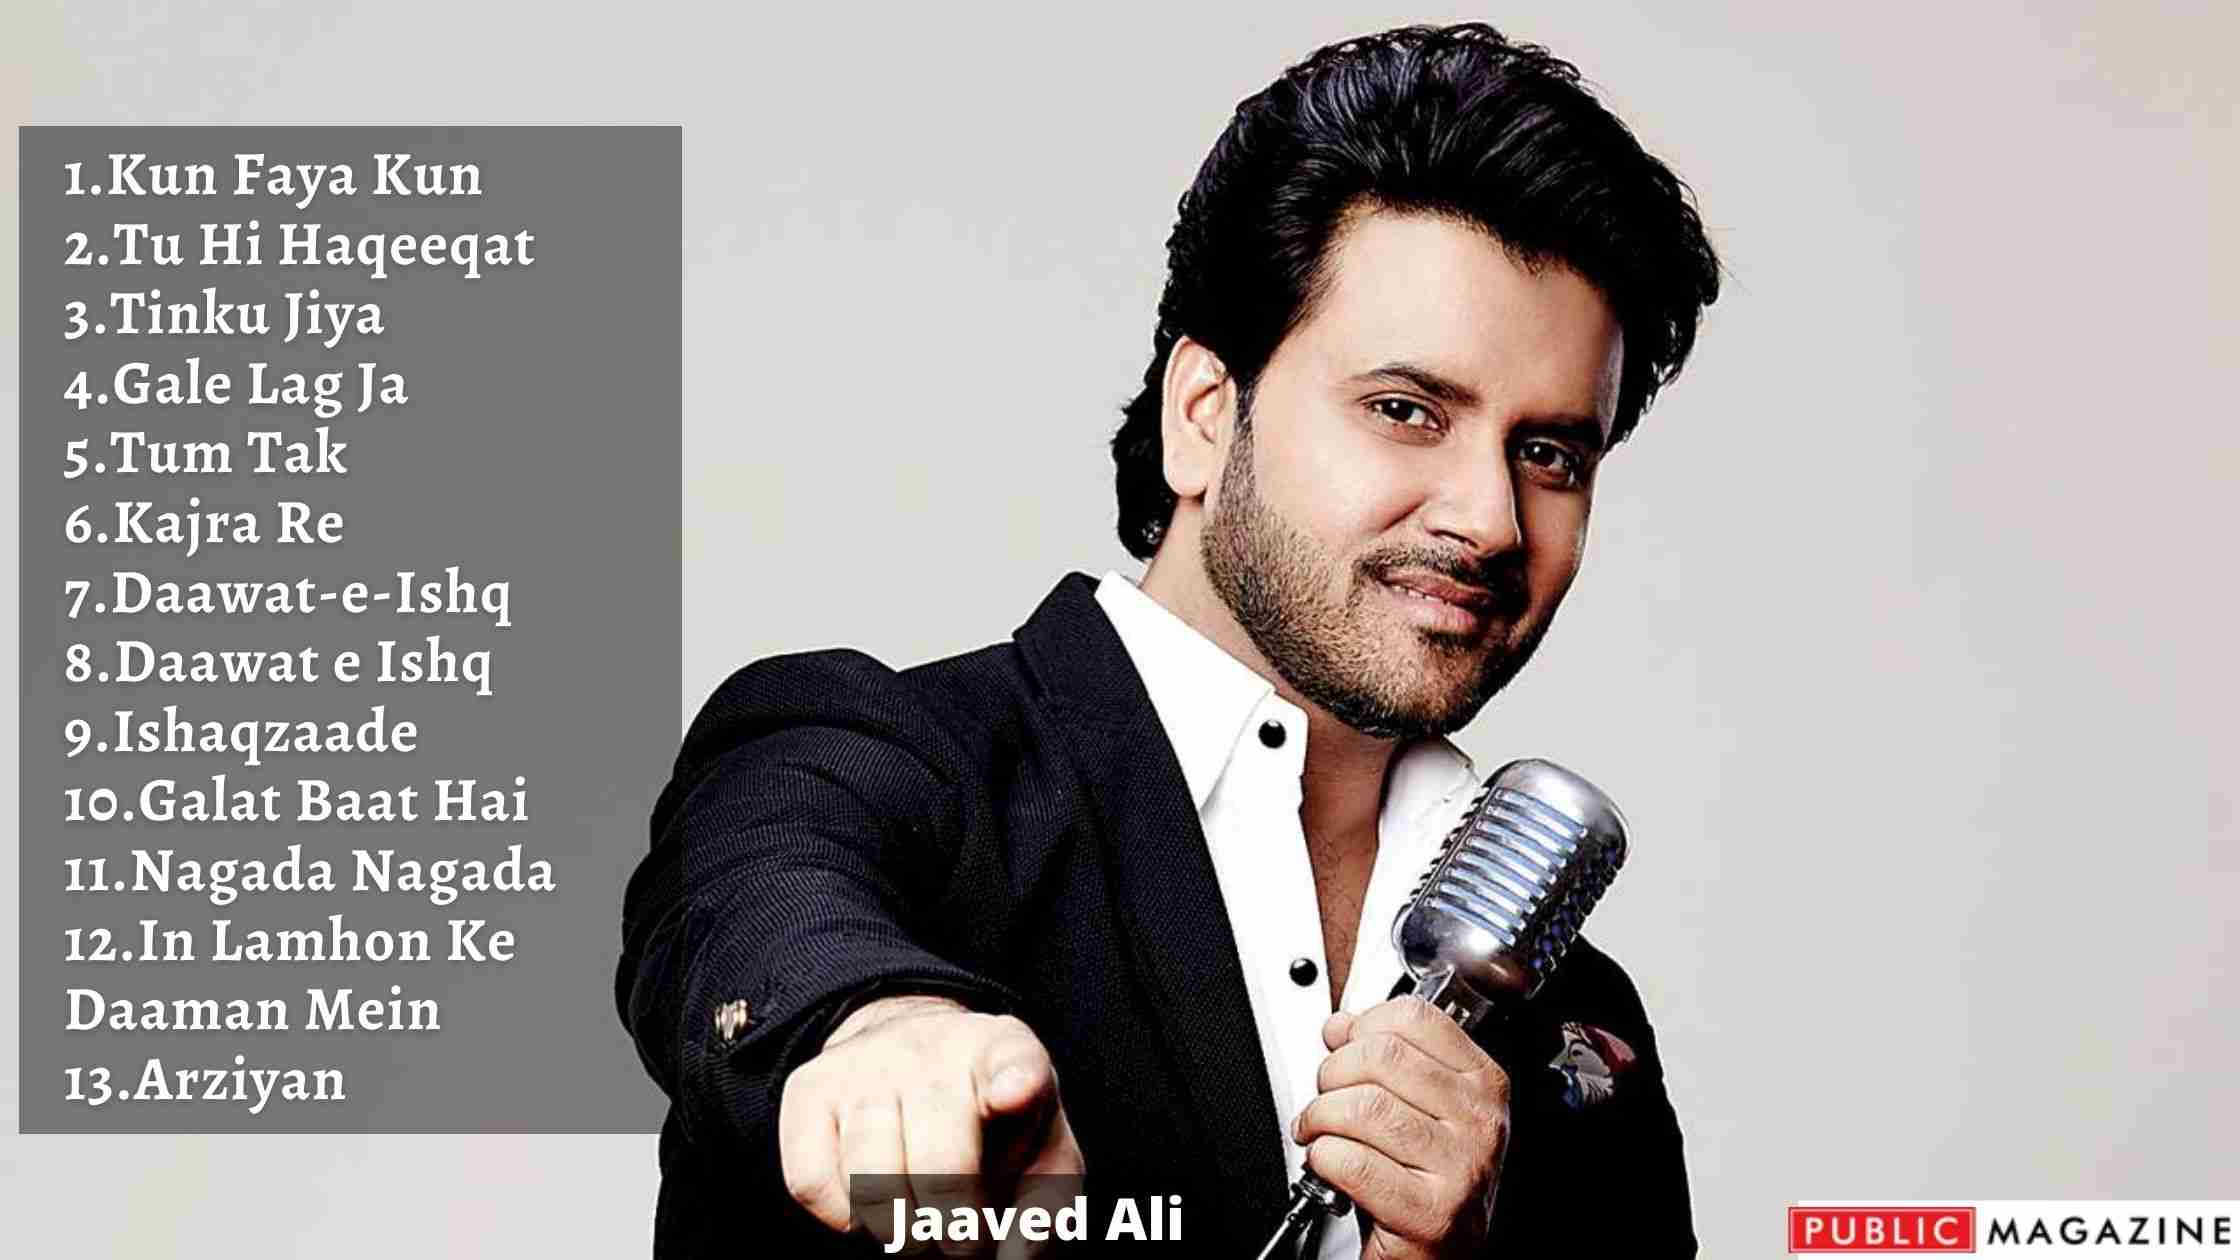 Jaaved Ali - Net Worth, Family, Songs, Wiki, And Biography